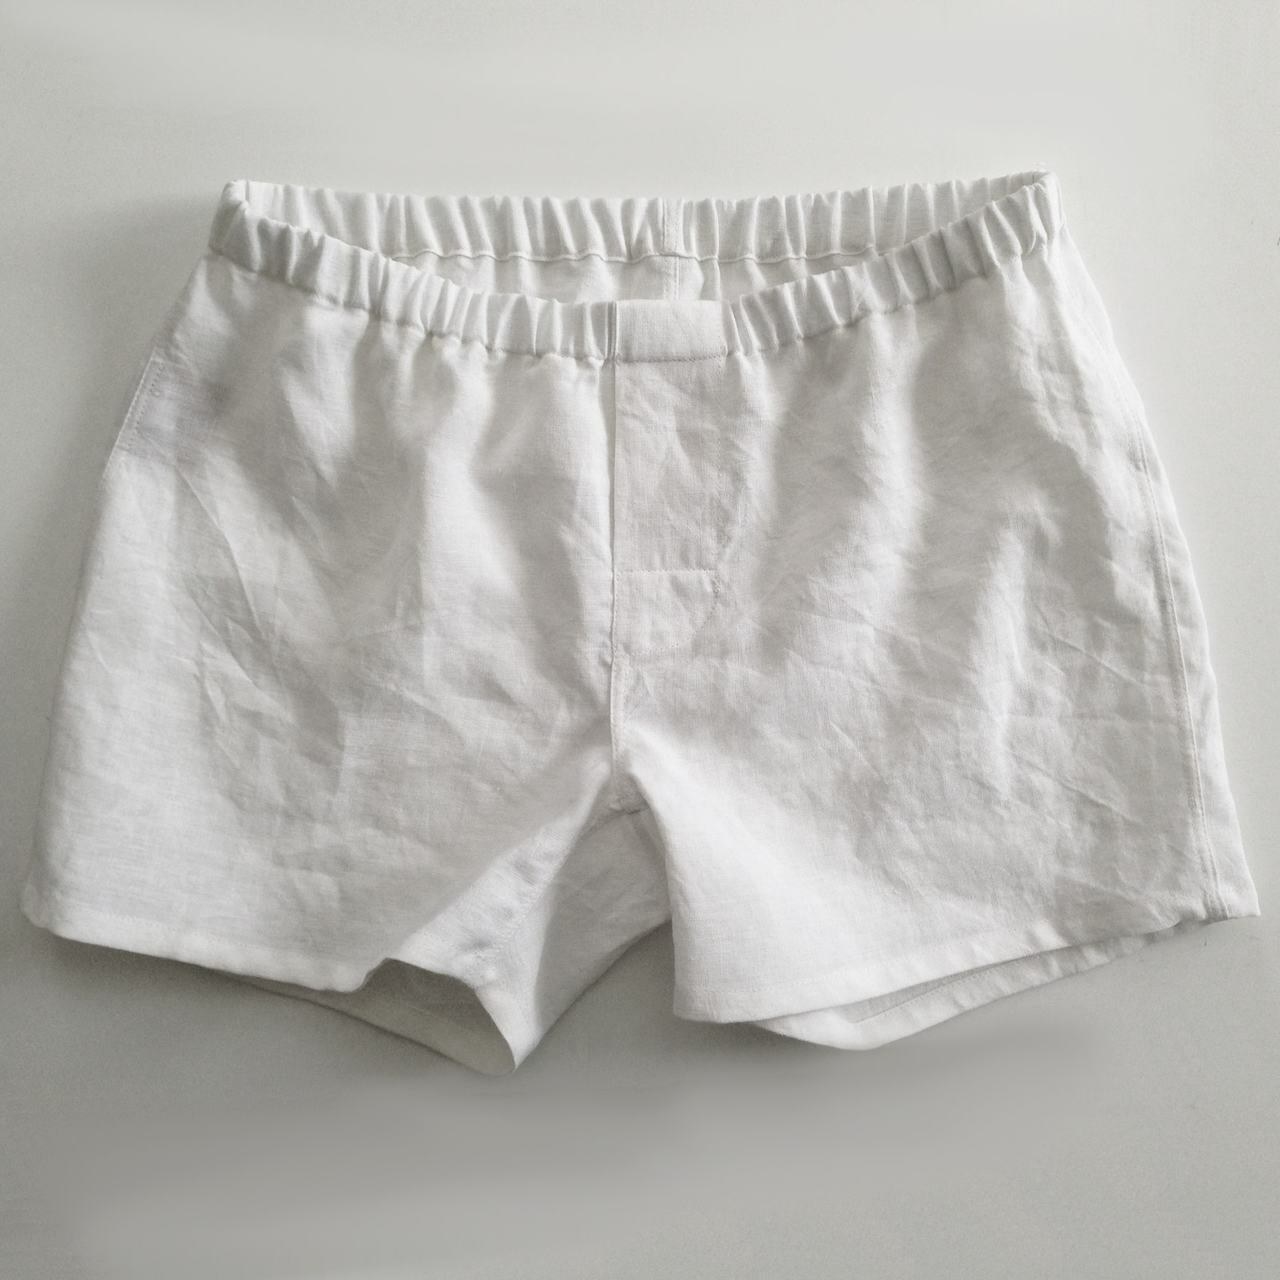 white boxer shorts with an elastic waist